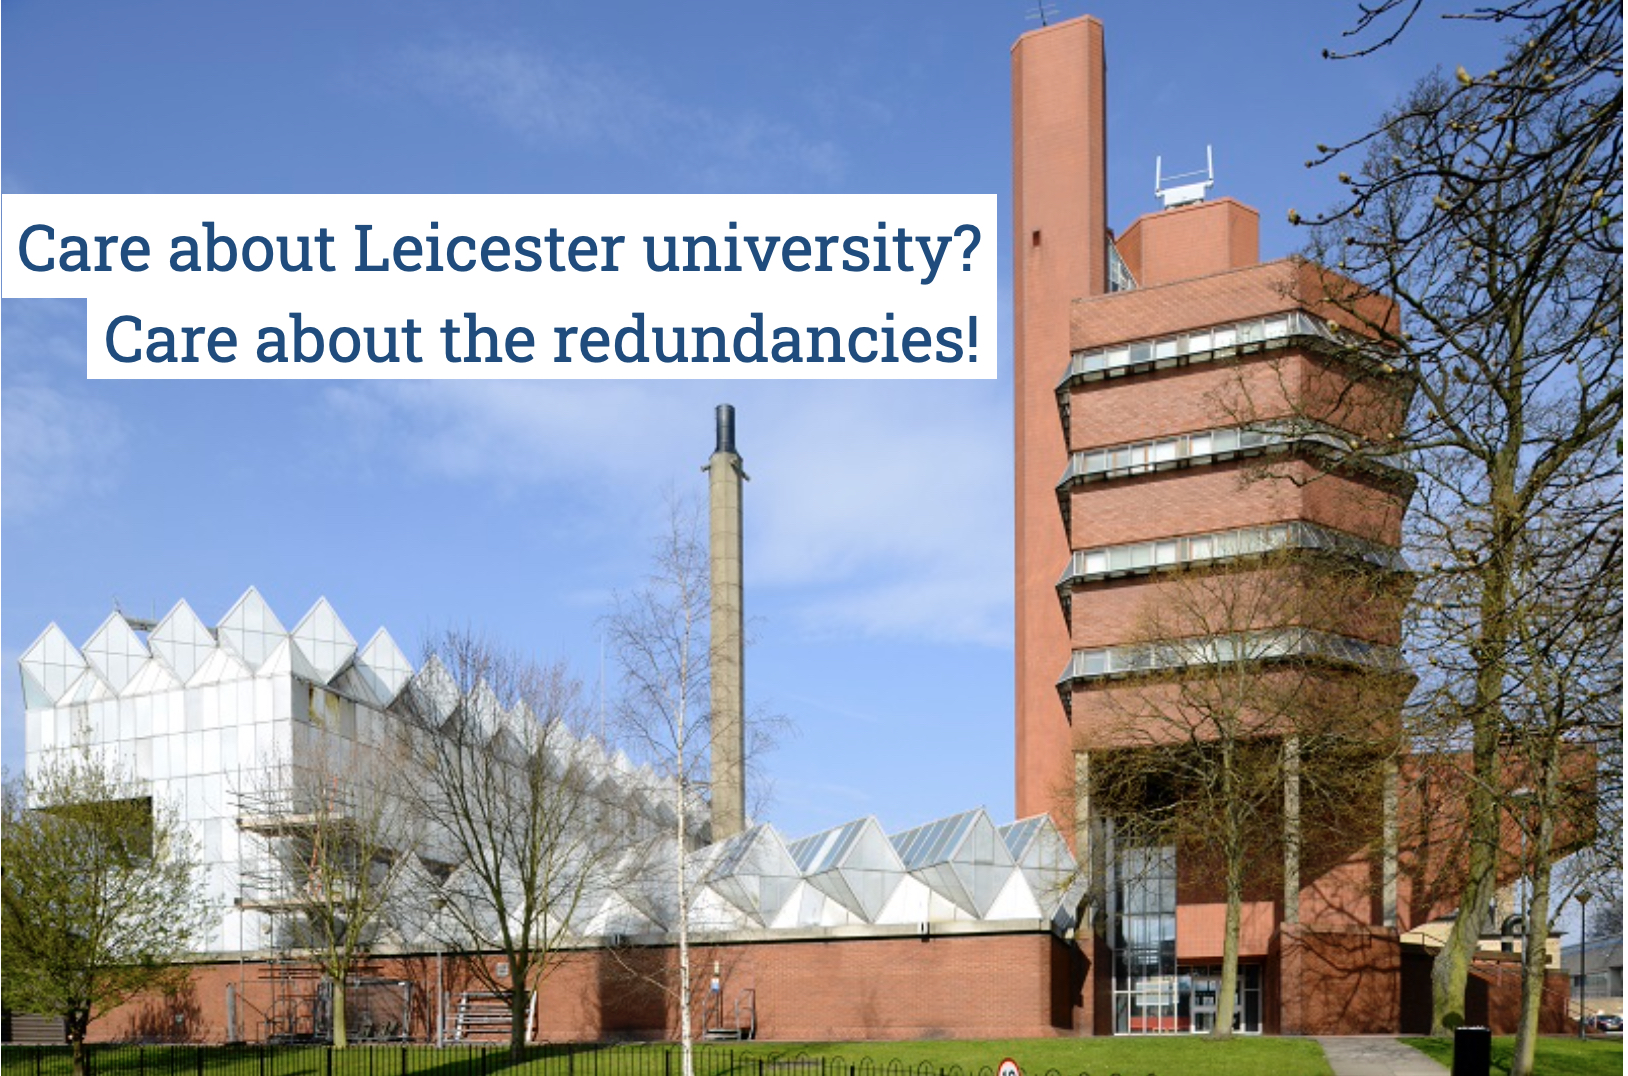 Image of University of Leicester buildings with text: "Care about Leicester university? Care about the redundancies!"